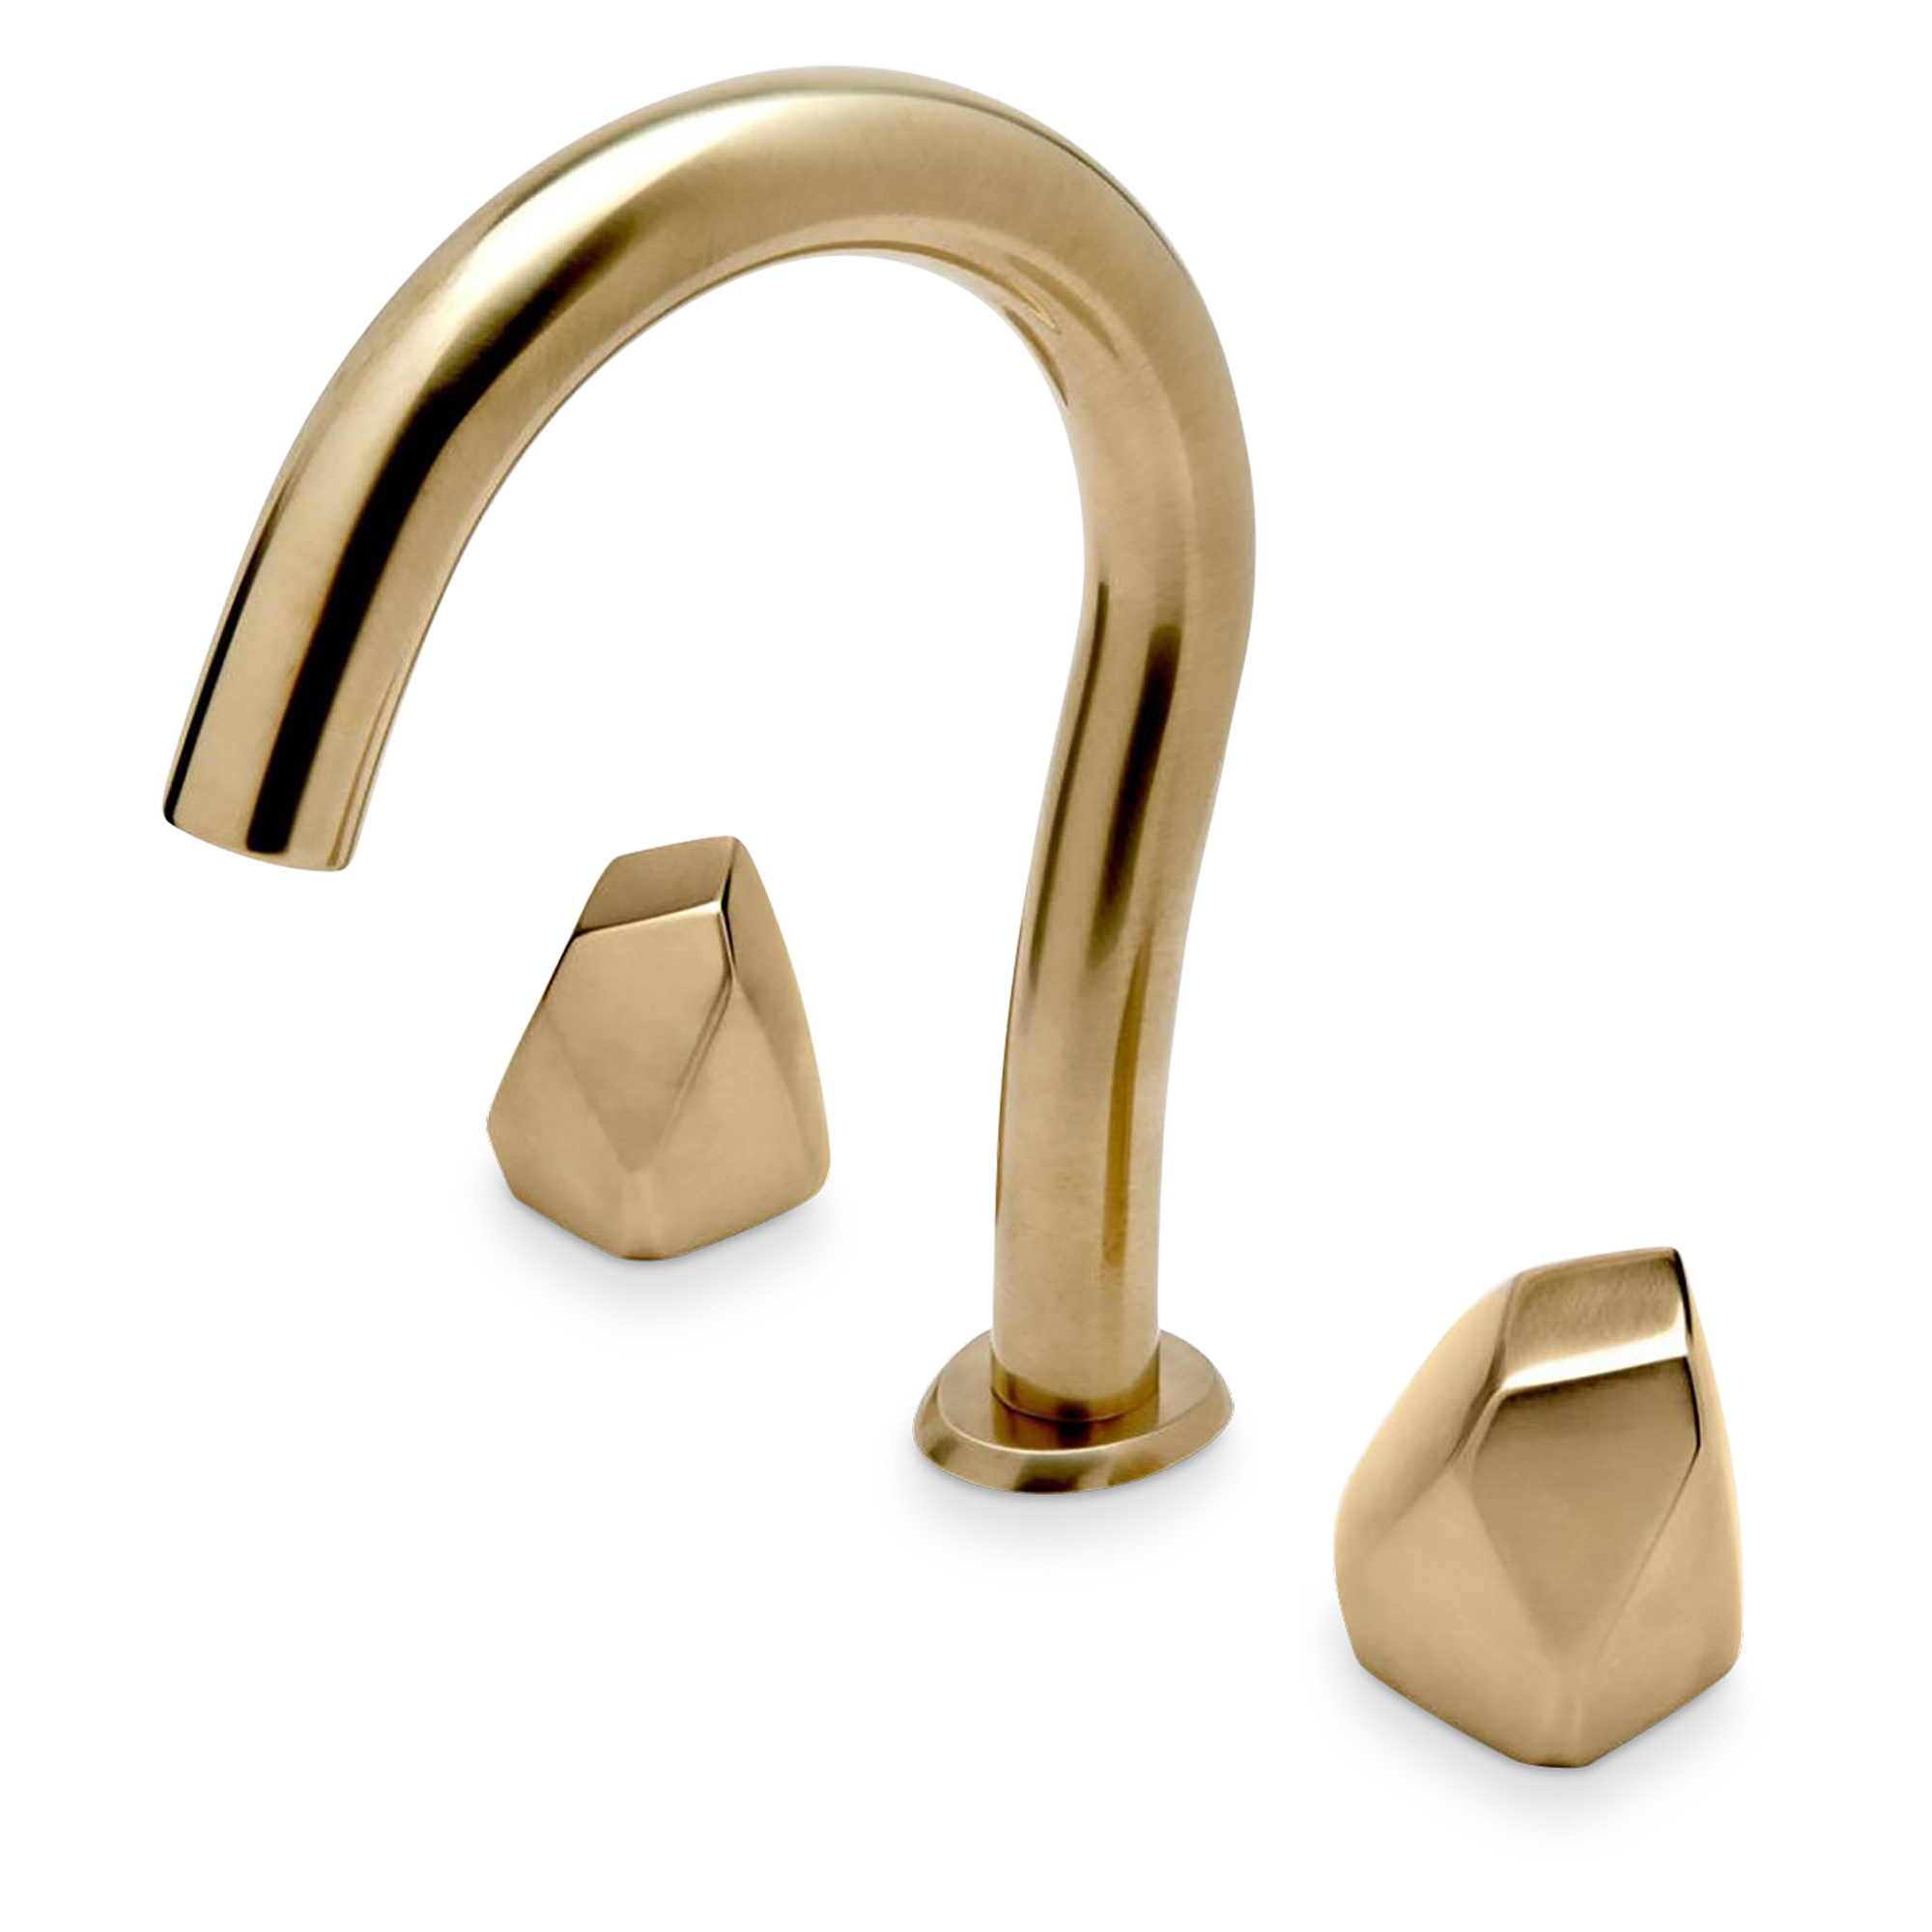 The Waterworks Isla Geode Faucet (Gooseneck) is pure, timeless, unique and versatile.